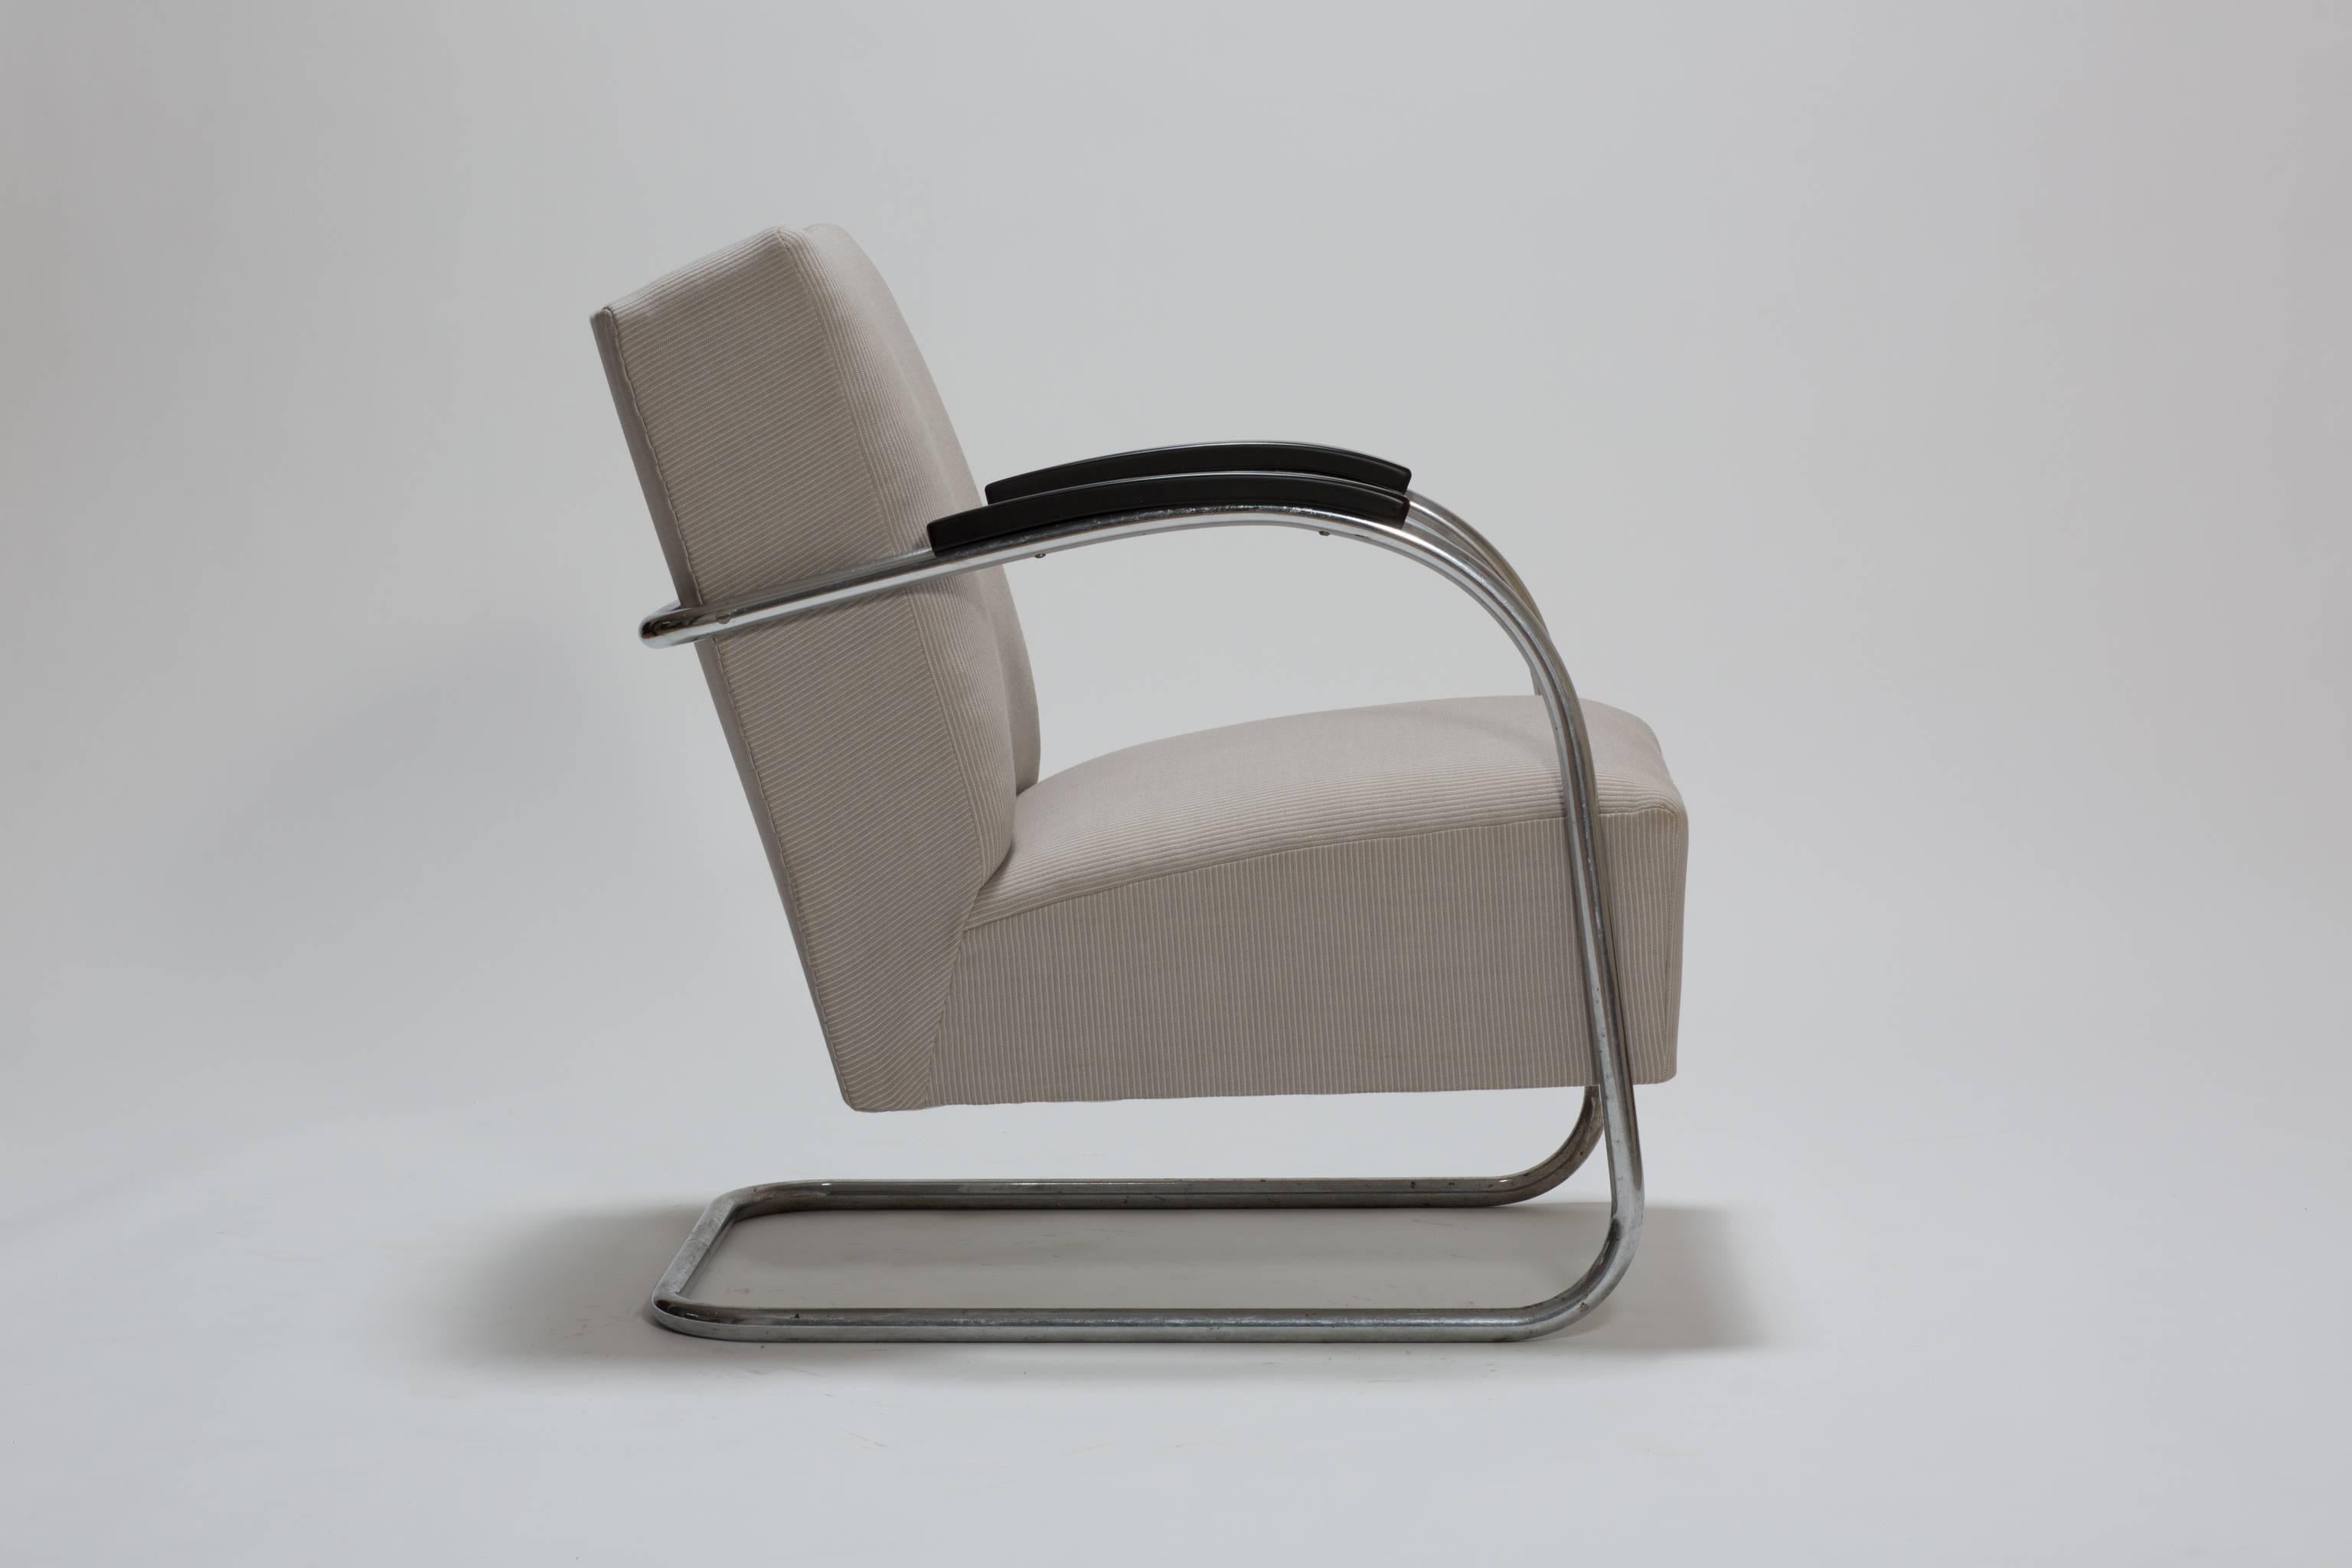 Cantilever Tubular Steel Armchair by Thonet Midcentury Bauhaus Period In Excellent Condition For Sale In Vienna, AT